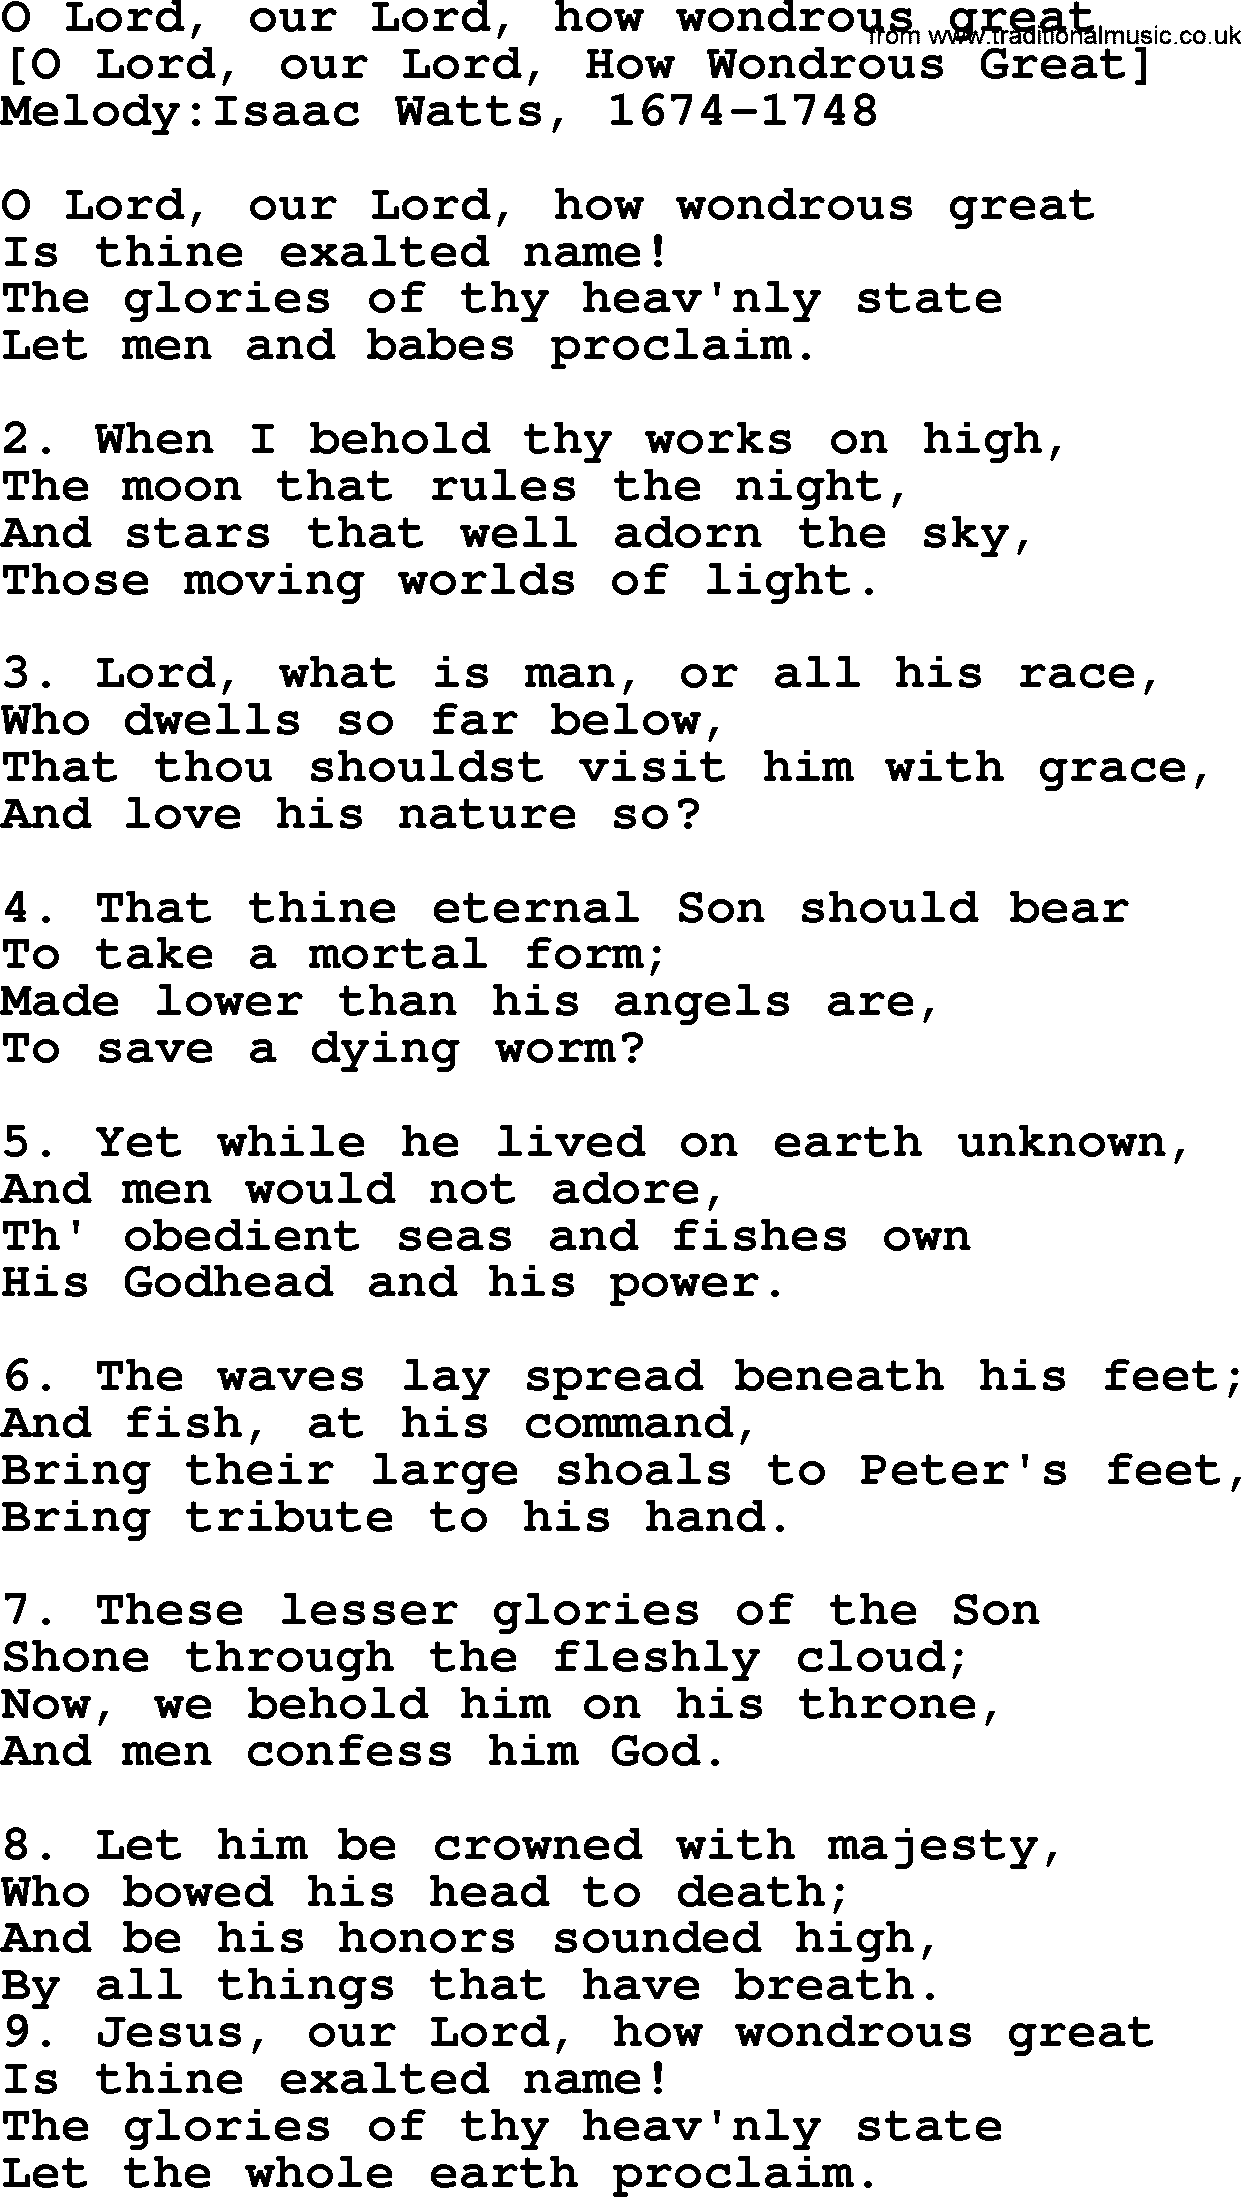 Old English Song: O Lord, Our Lord, How Wondrous Great lyrics